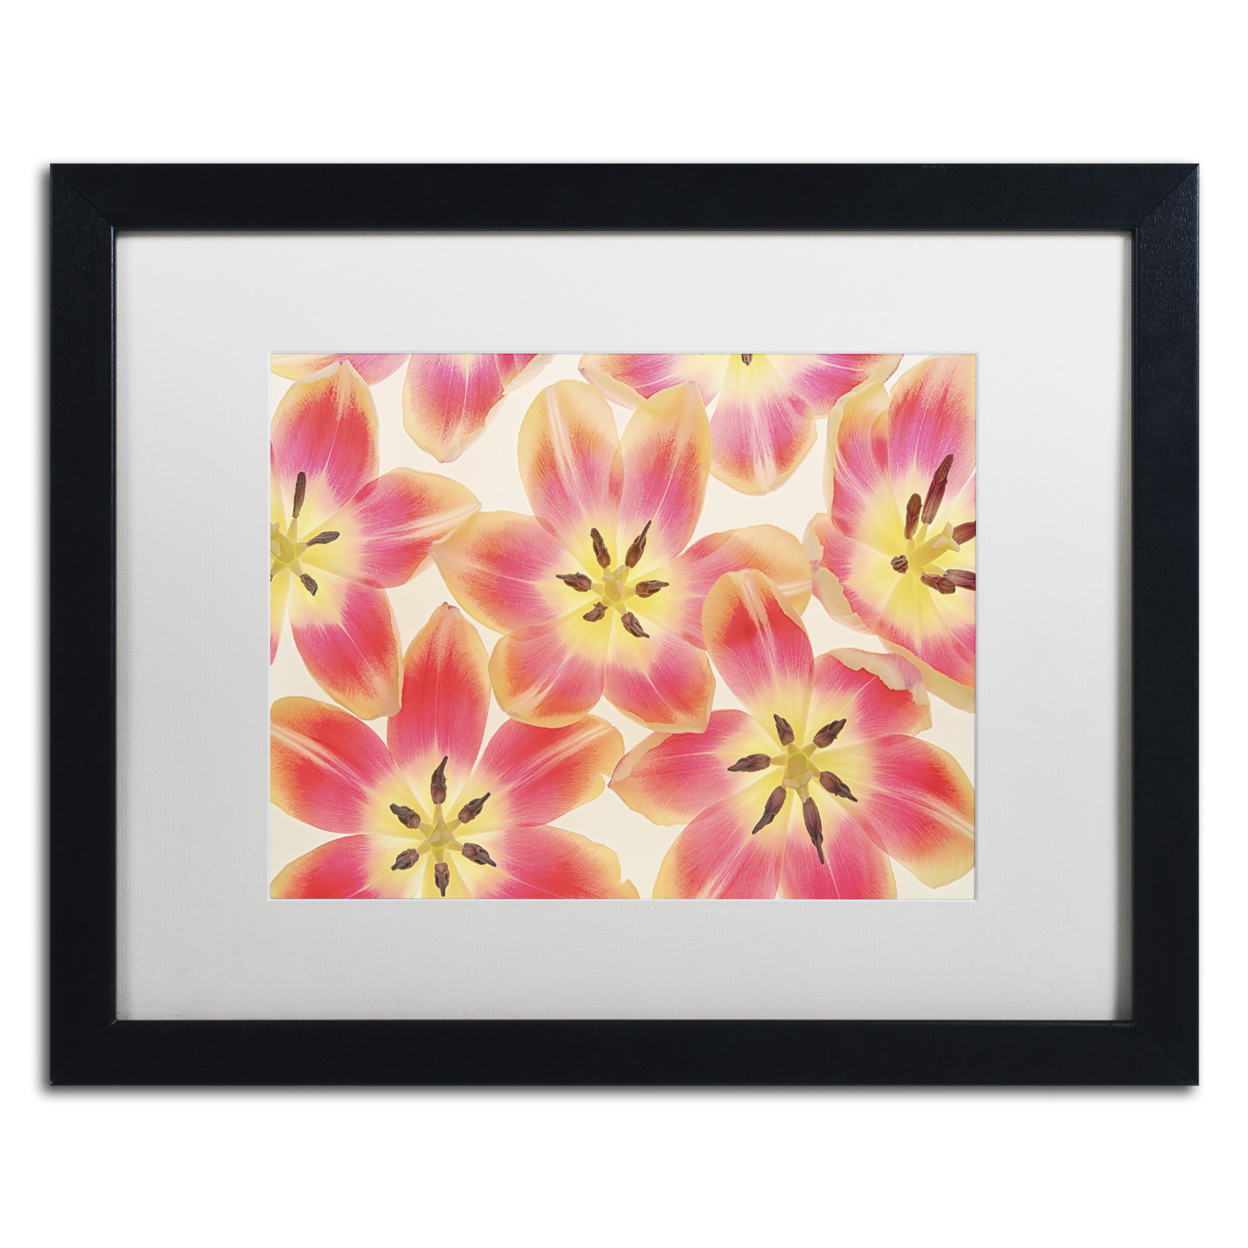 Cora Niele 'Yellow And Coral Red Tulips' Black Wooden Framed Art 18 X 22 Inches